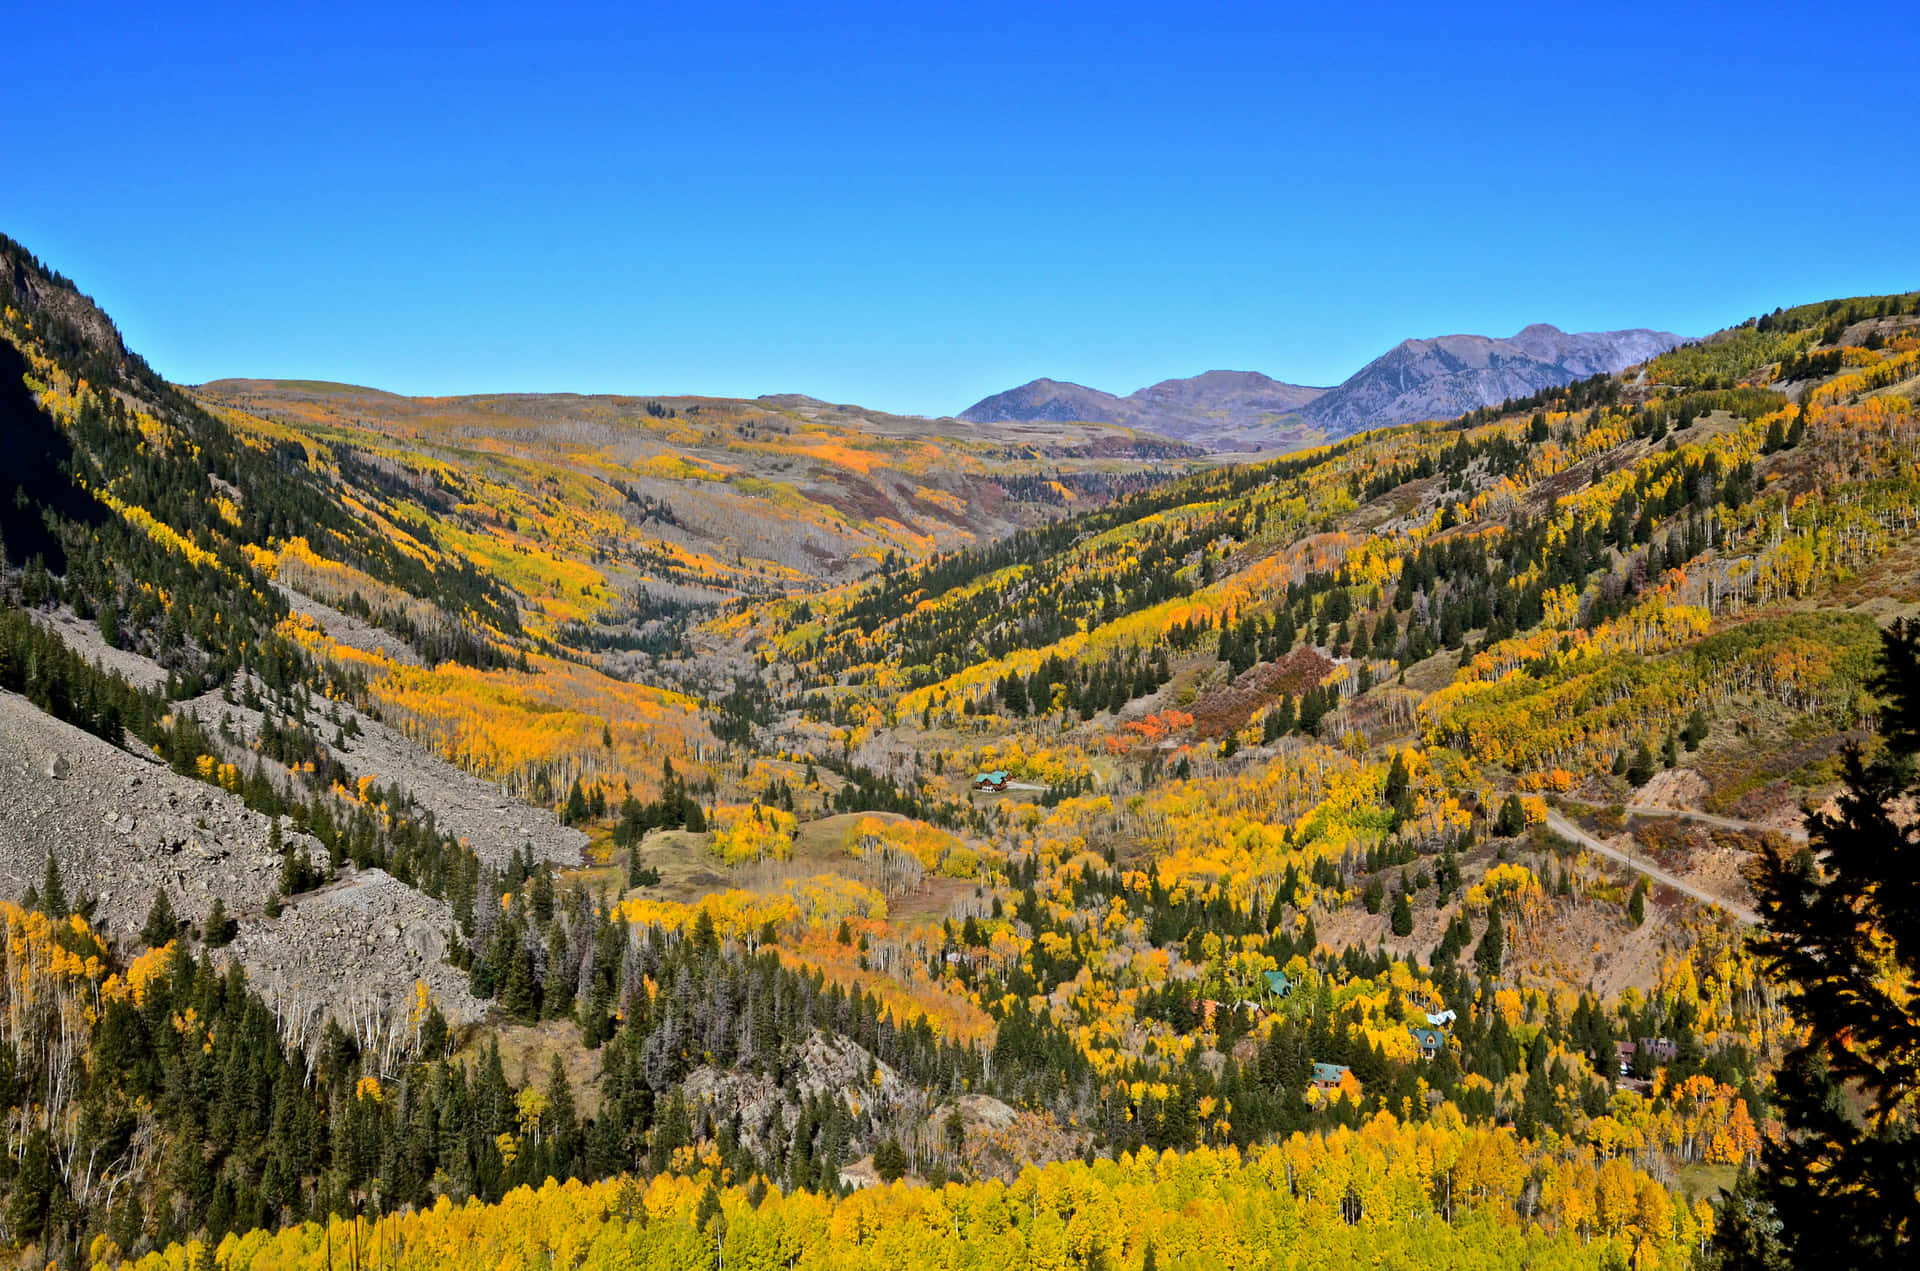 Take in the beauty of the Colorado Mountains